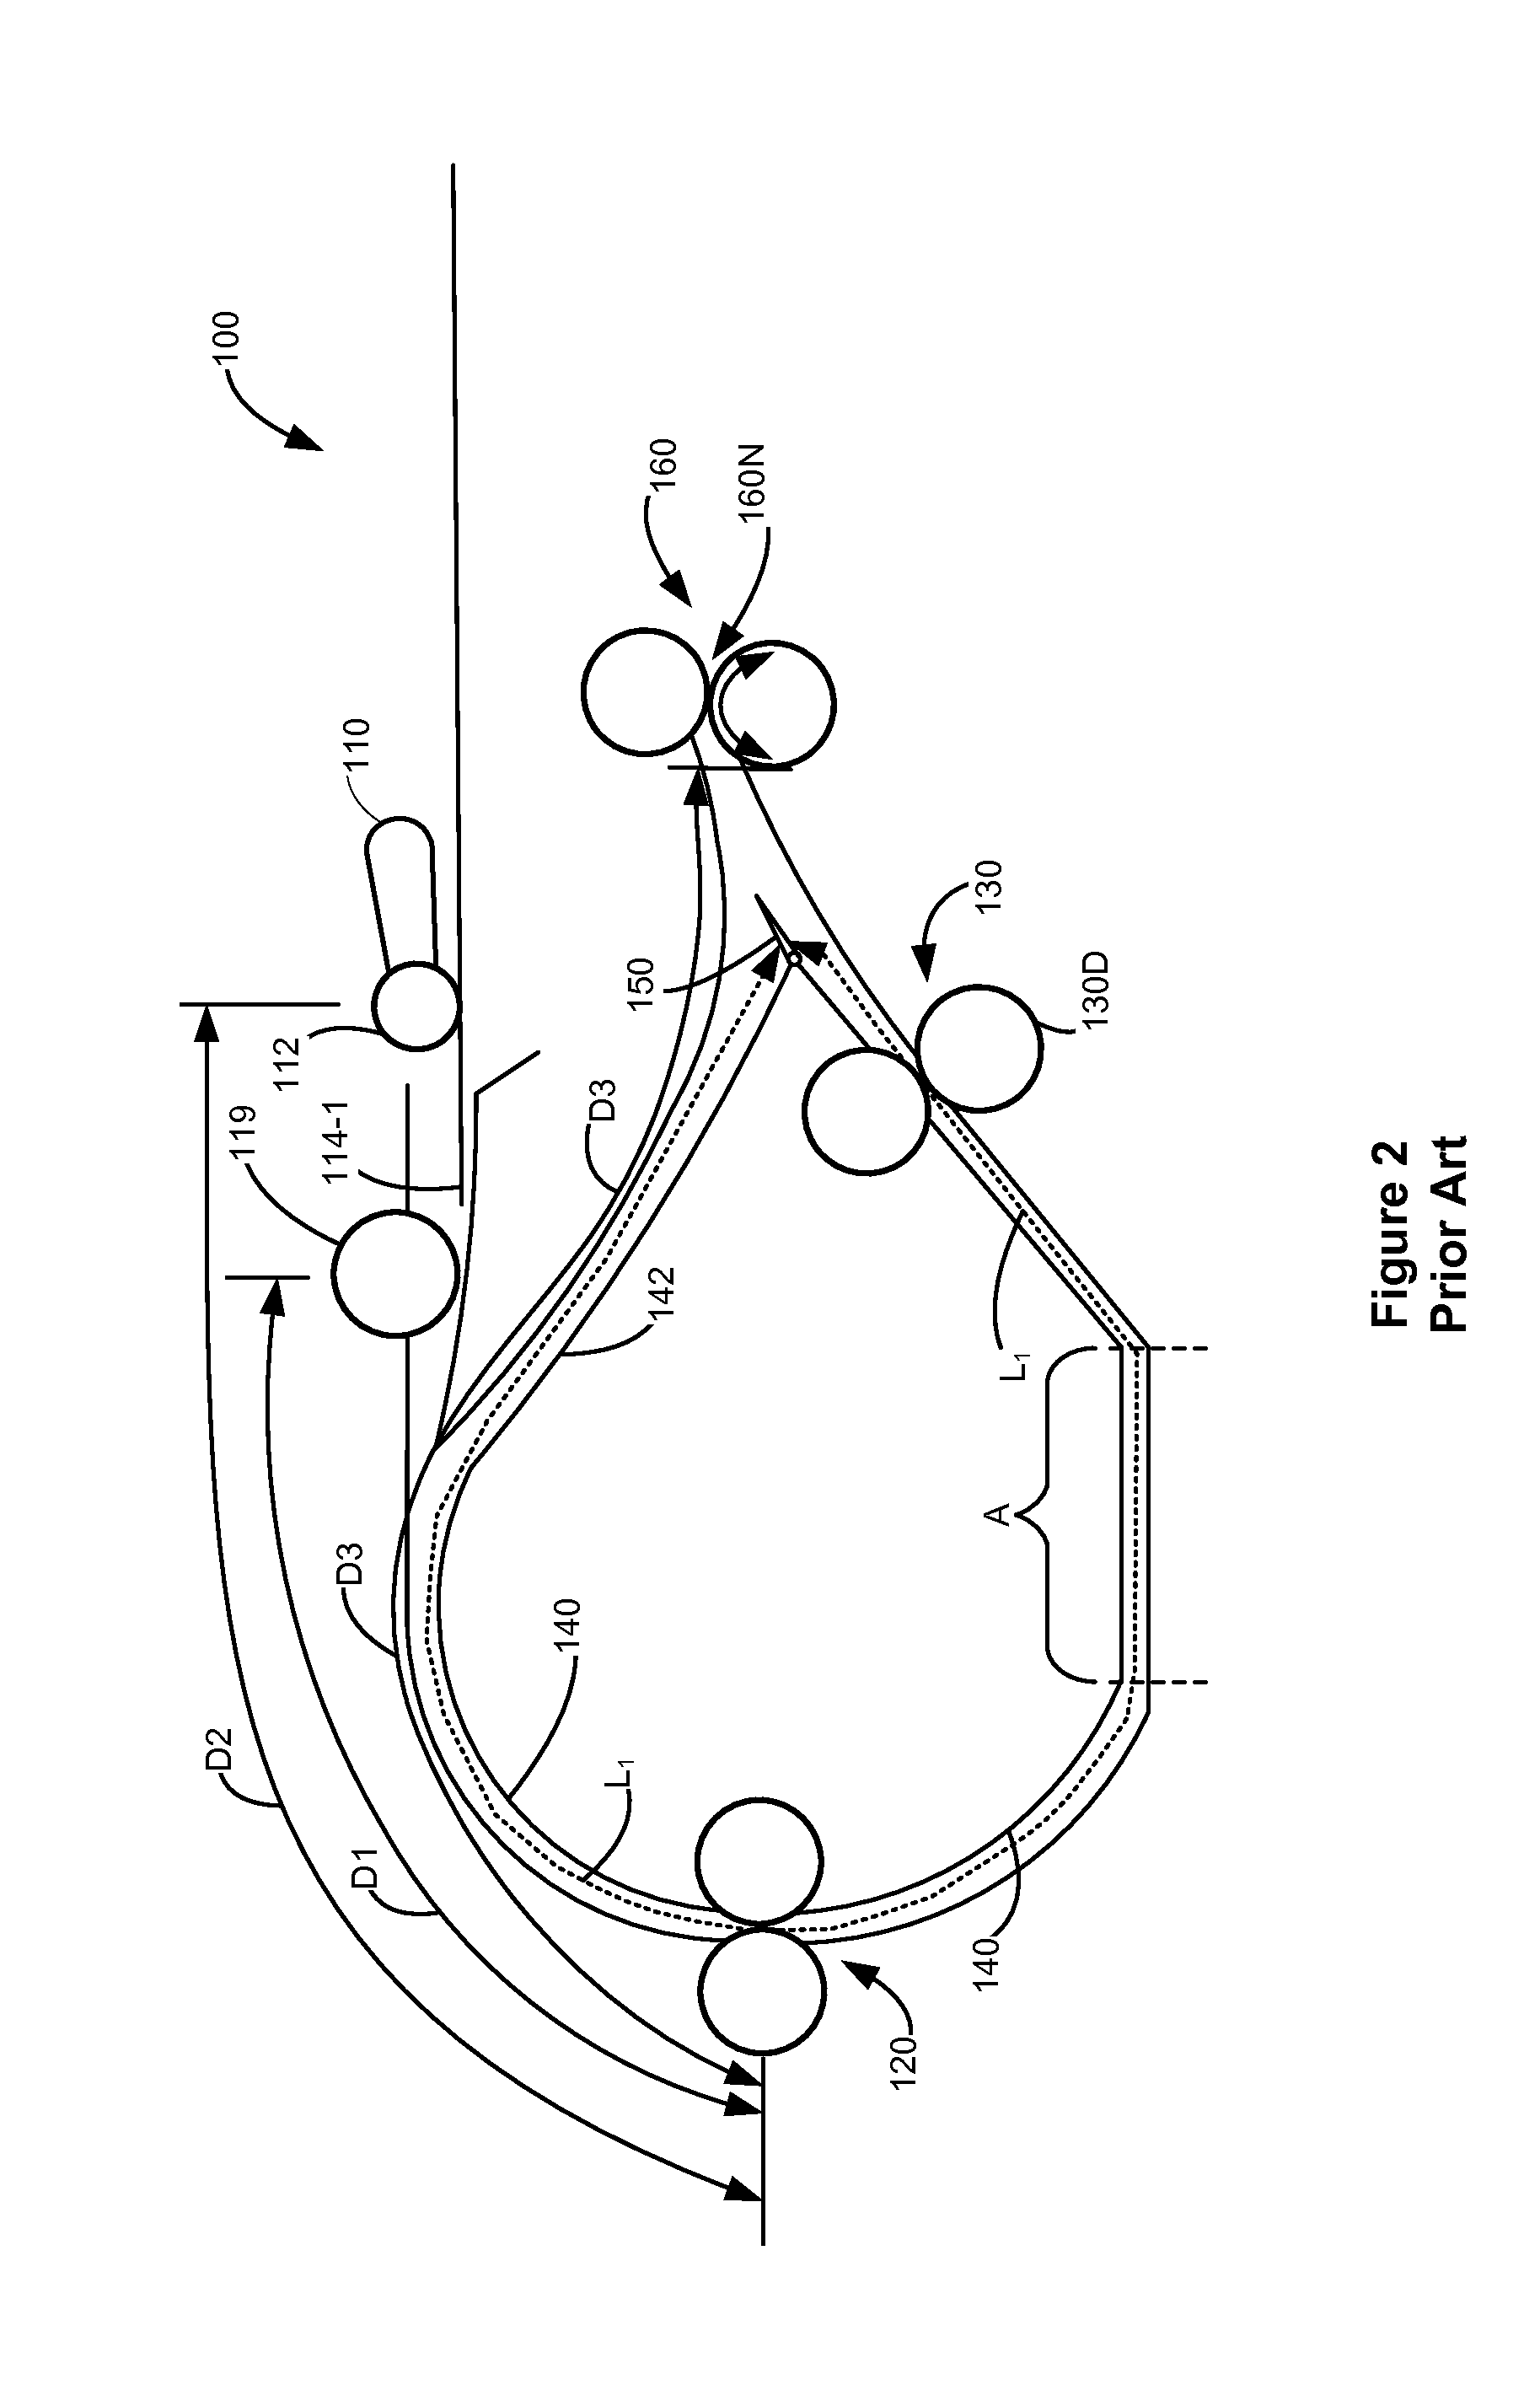 Media retractor and recycler system for automatic document feeders and duplexers and method for using same